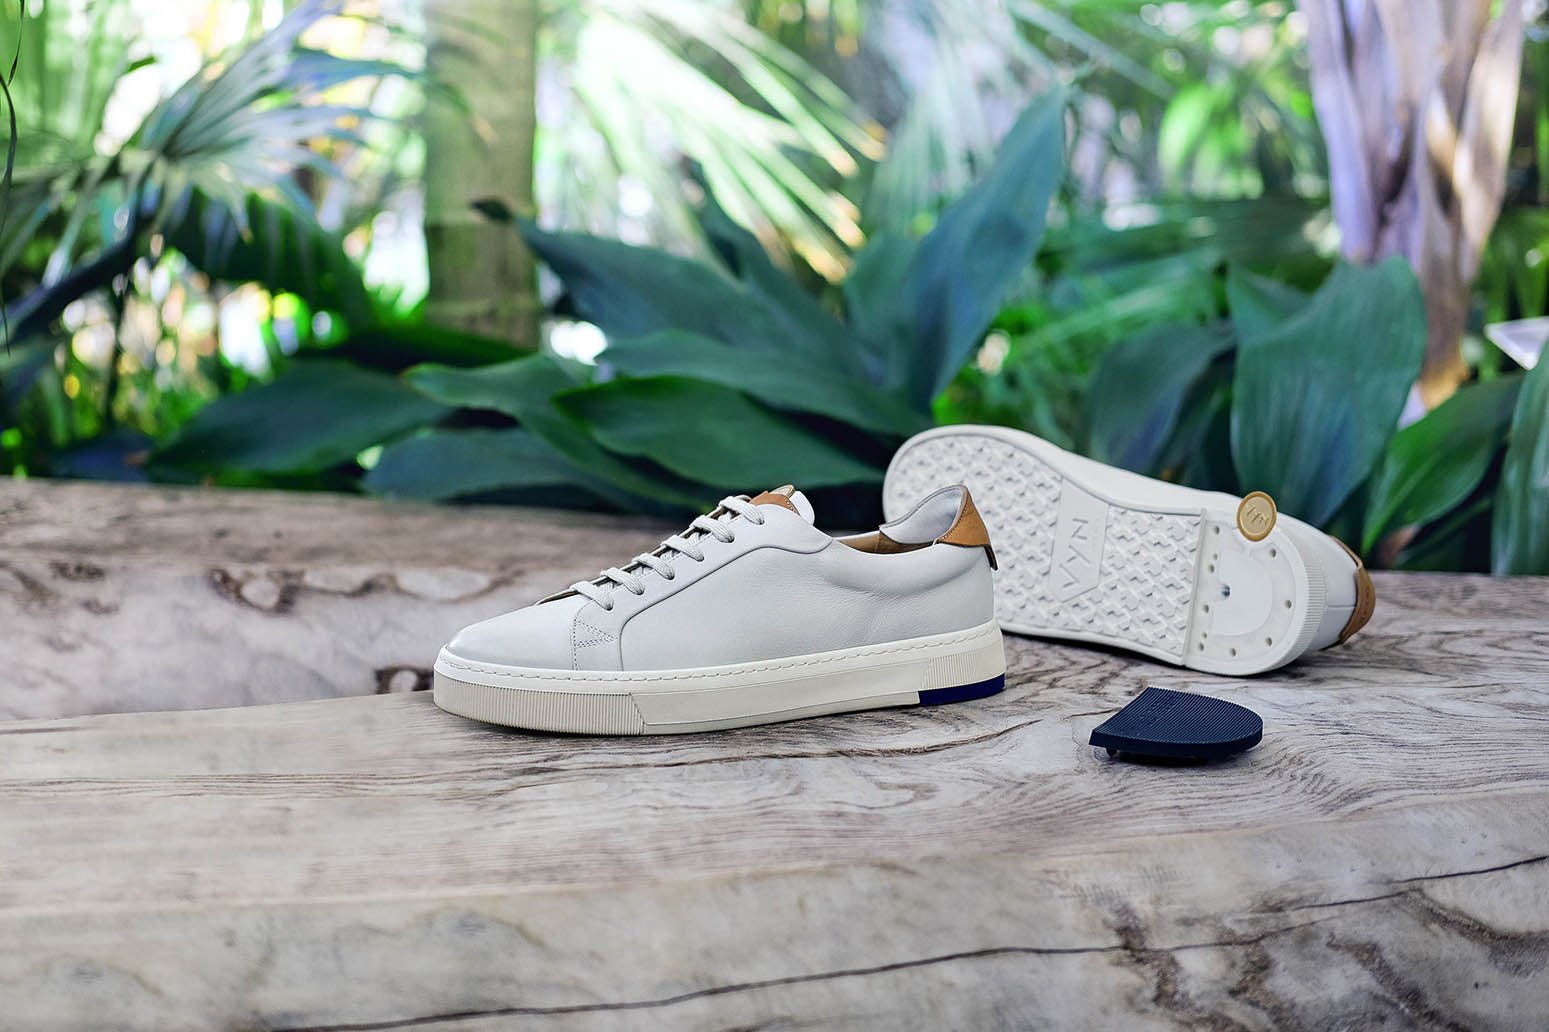 Sustainable sneakers: the way it should be